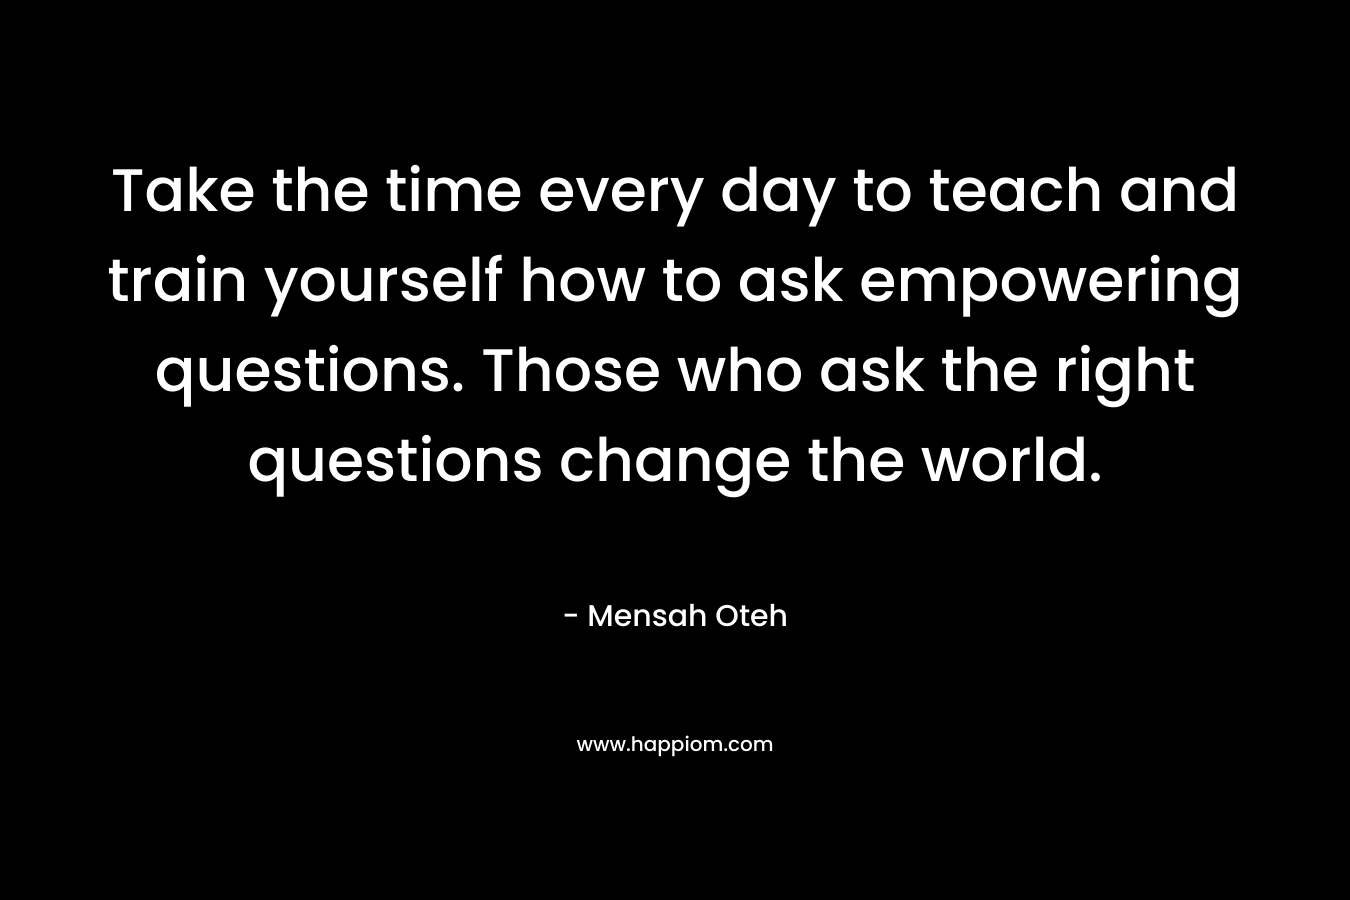 Take the time every day to teach and train yourself how to ask empowering questions. Those who ask the right questions change the world.